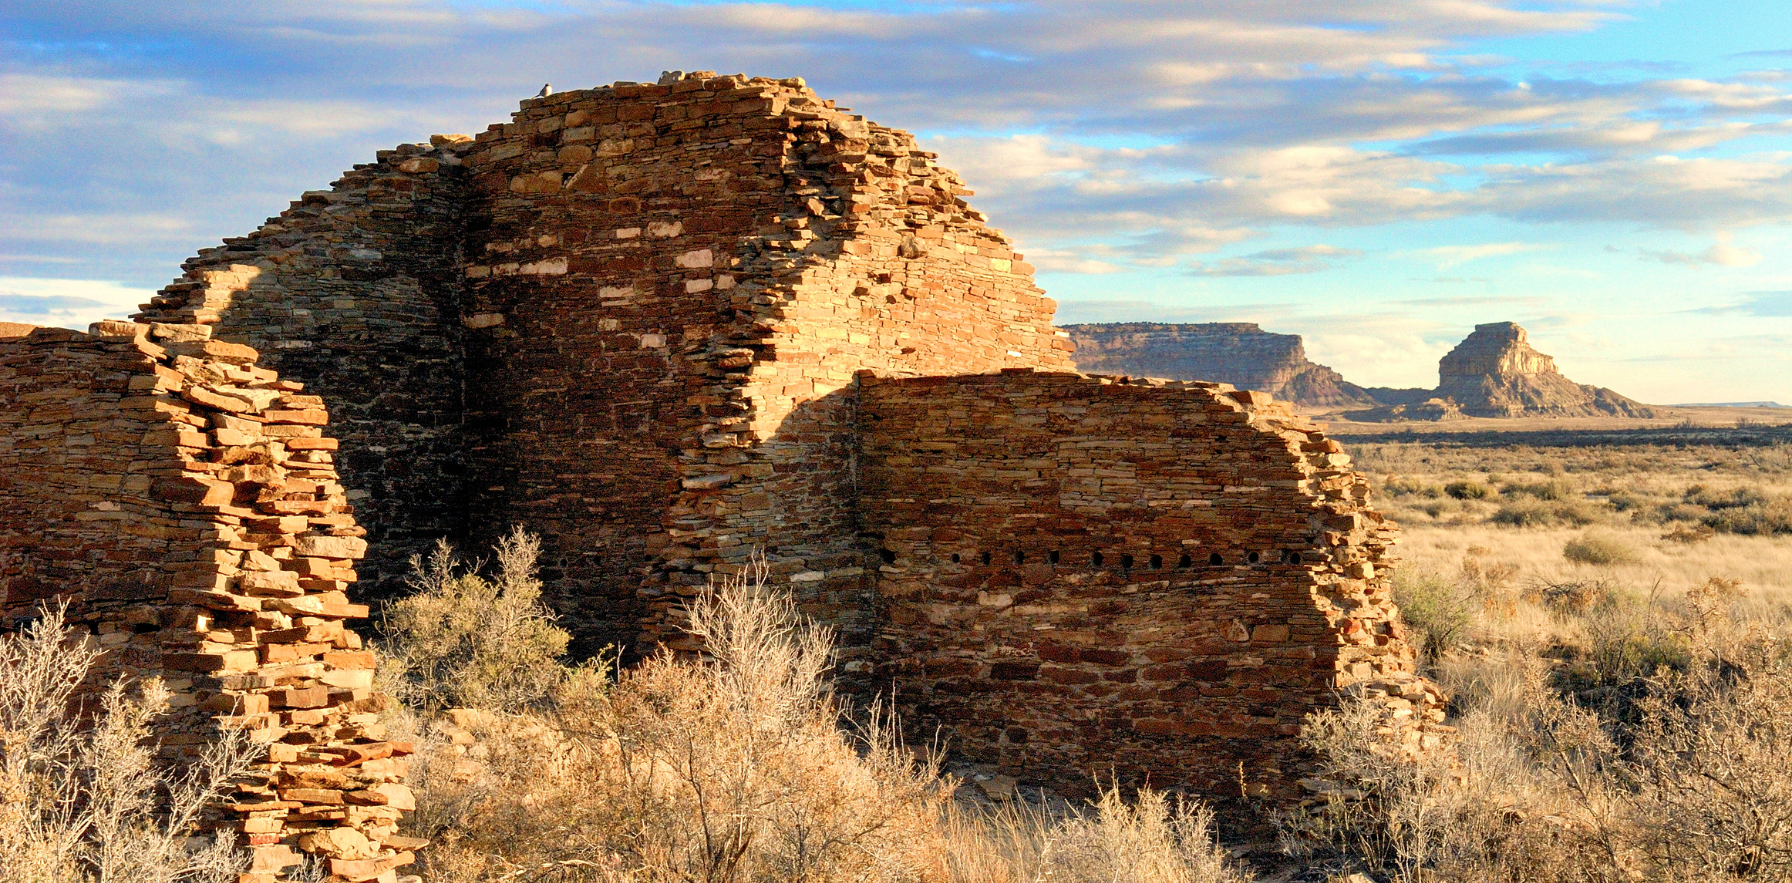 New Mexico Communities Strongly Oppose Legislation to Nullify Chaco Protections, Affirm Support for Measures Protecting Greater Chaco from Oil and Gas Drilling